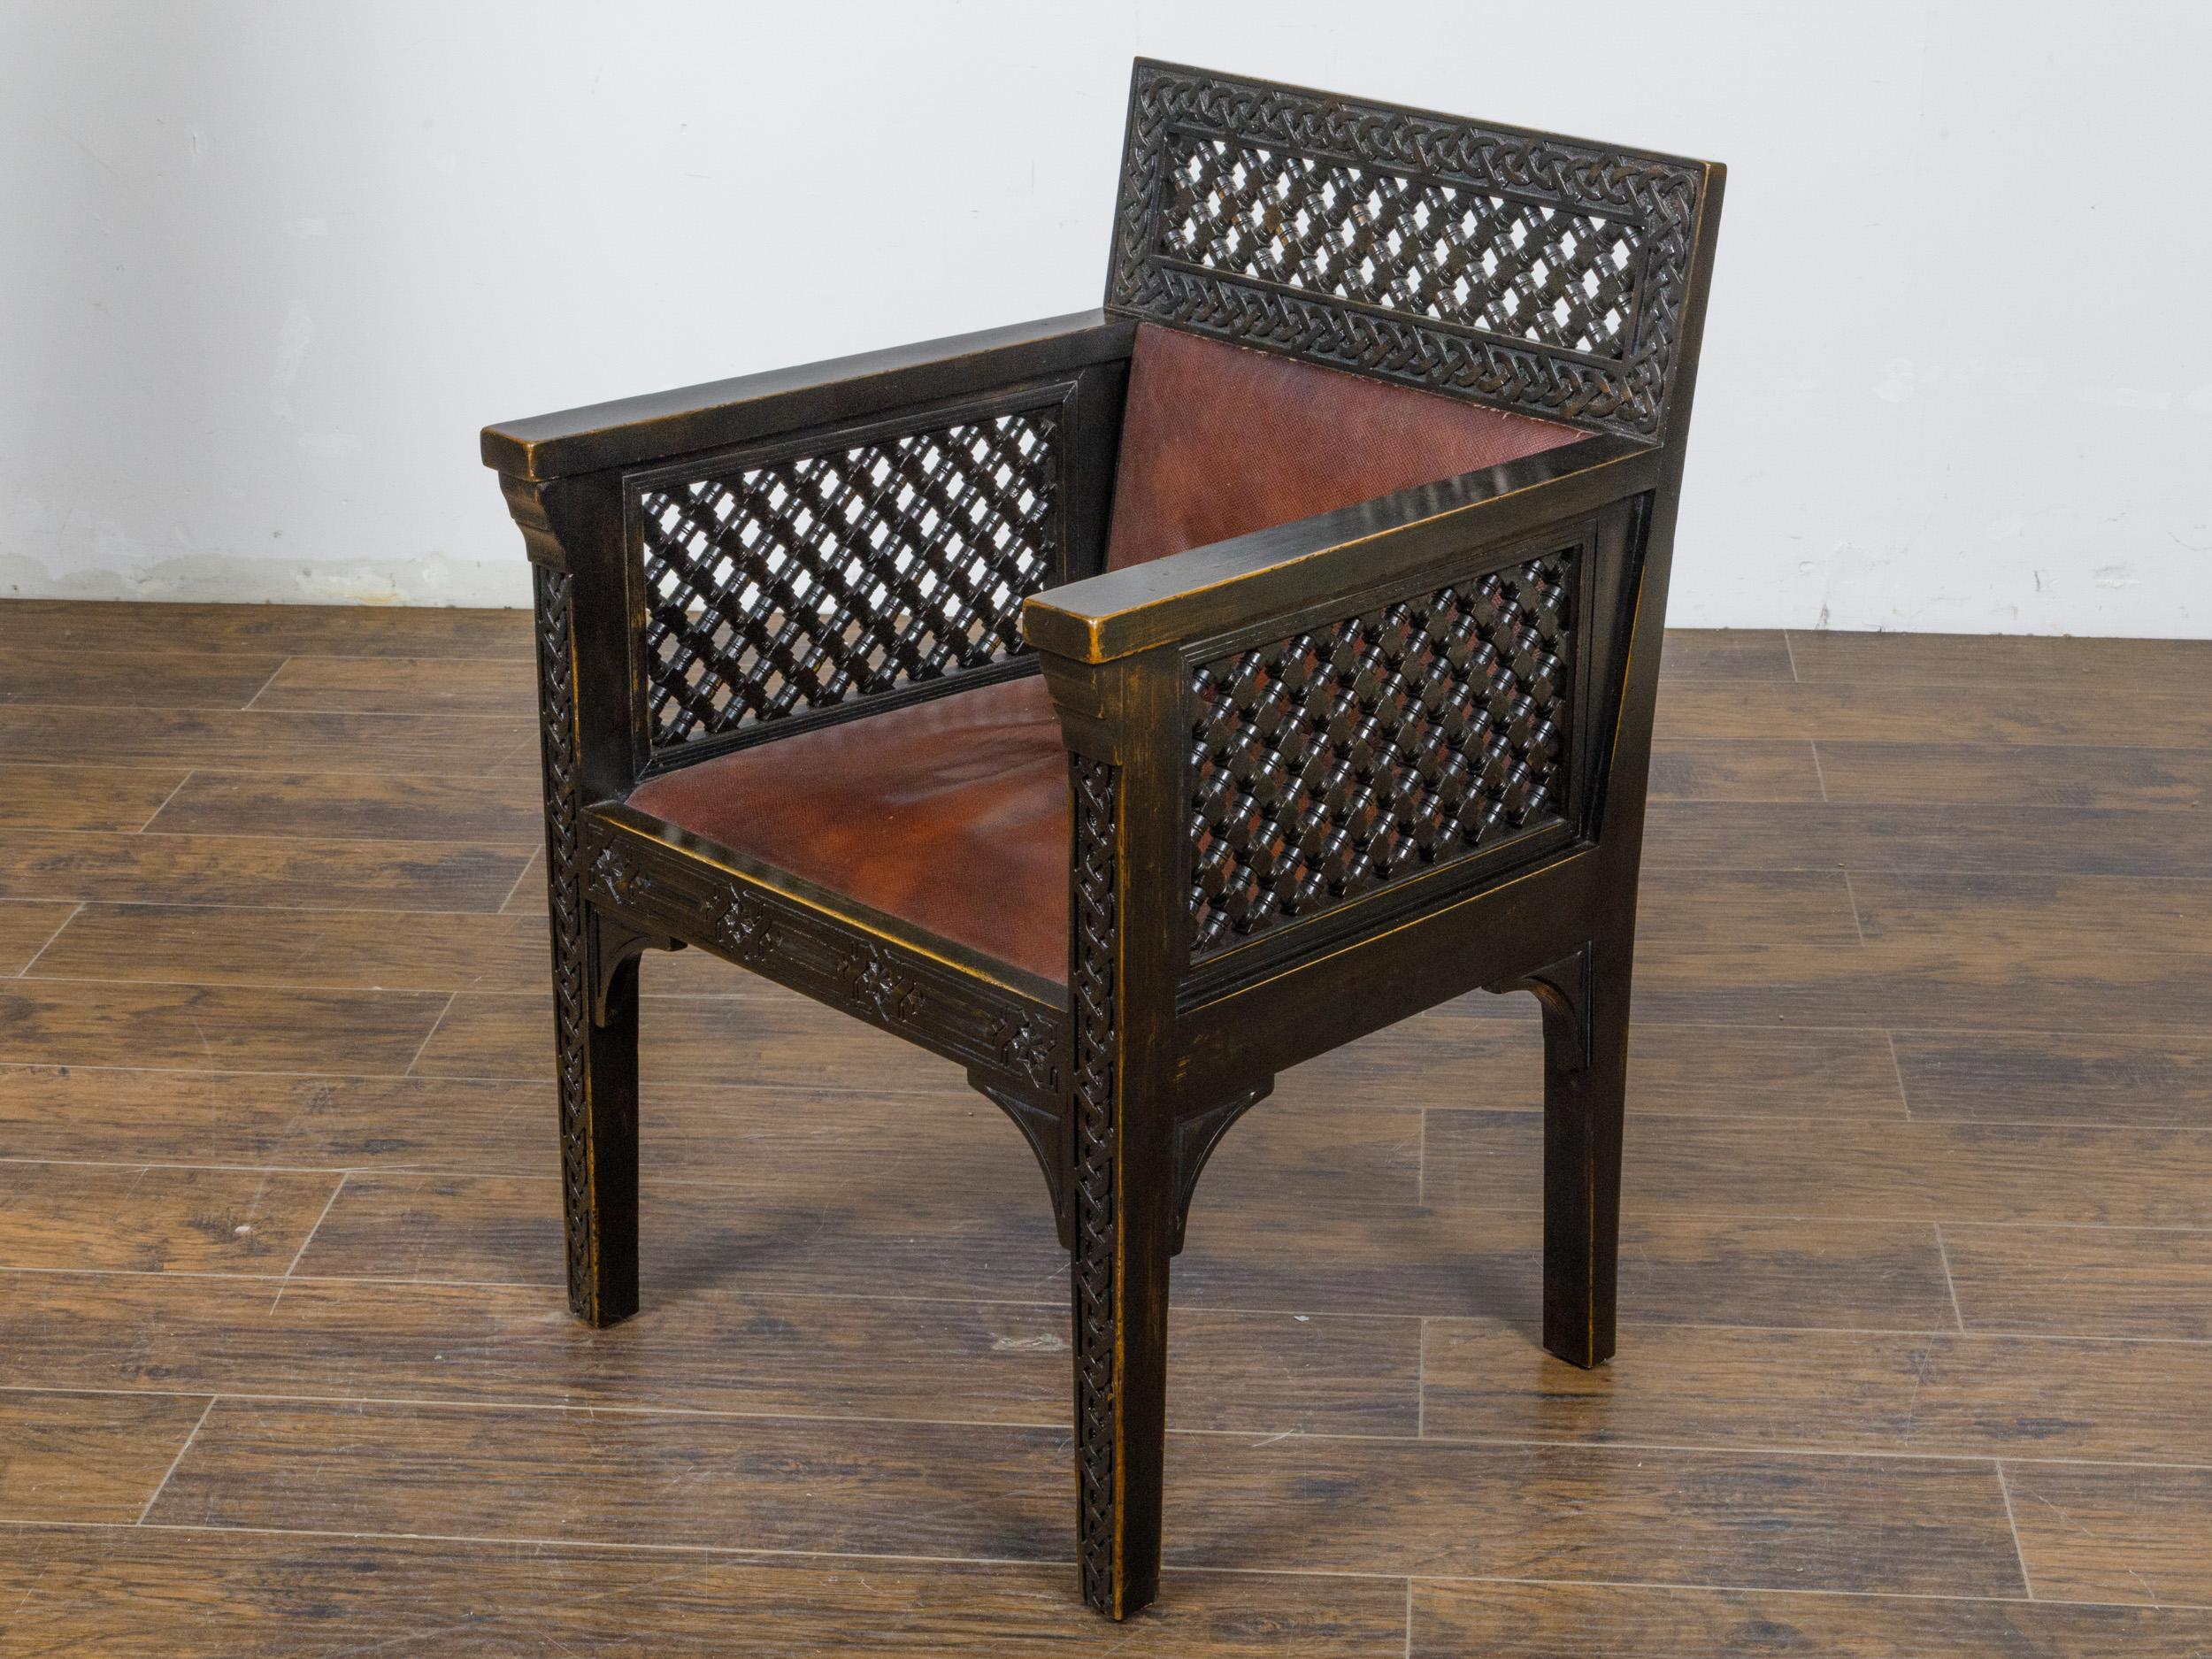 Set of 12 Moroccan Ebonized Carved Wood Armchairs with Leather Seats, circa 1900 For Sale 4